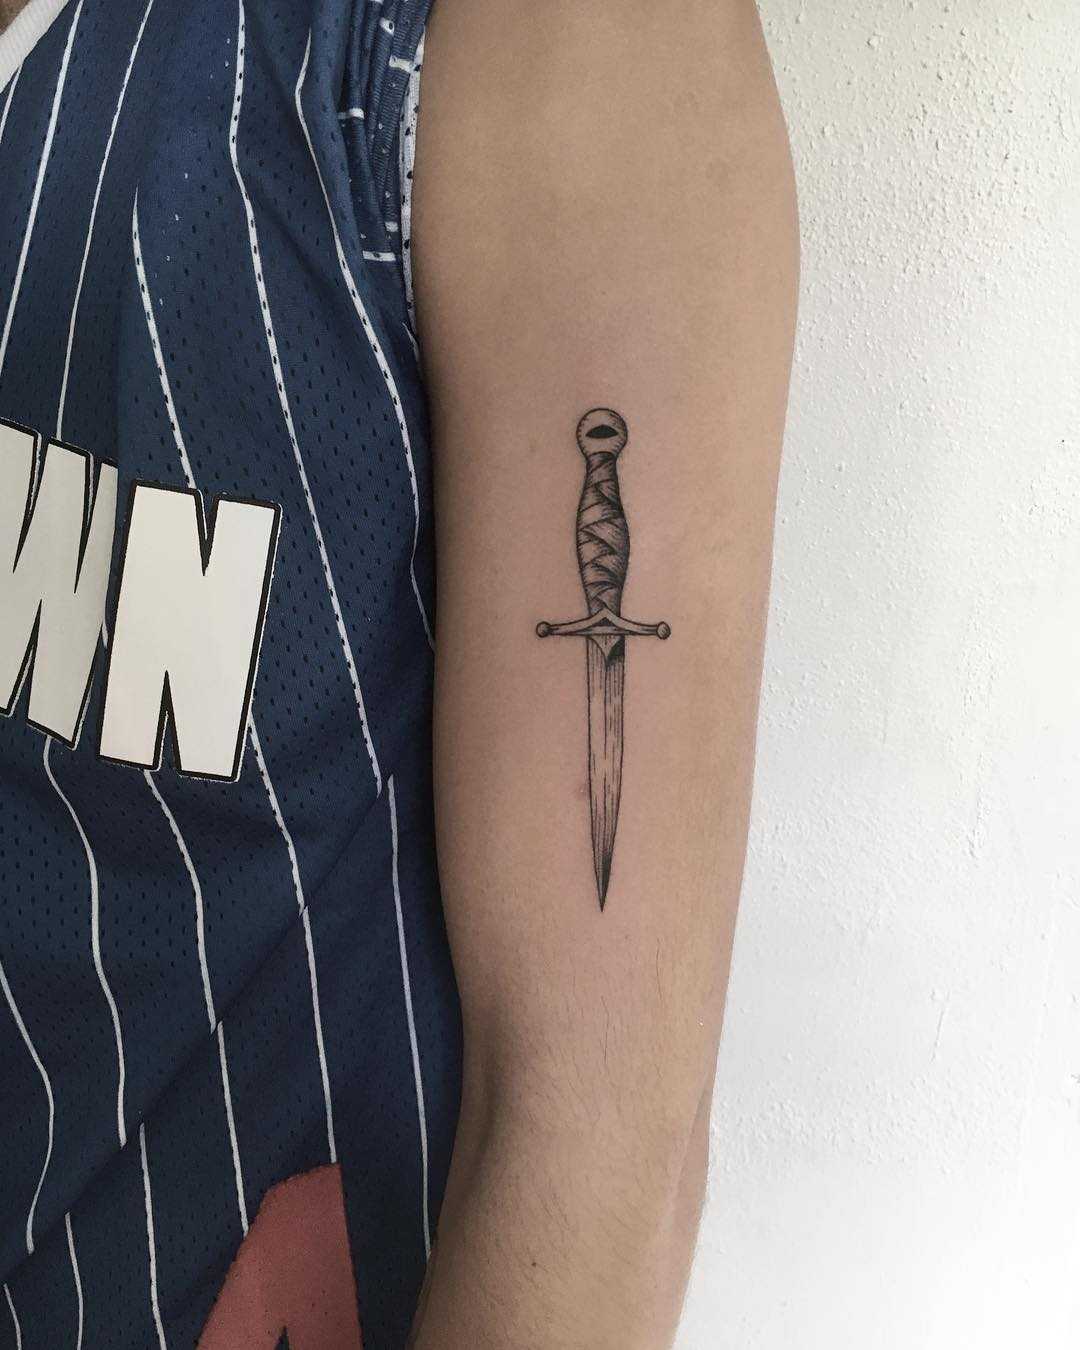 Small dagger tattoo on the arm